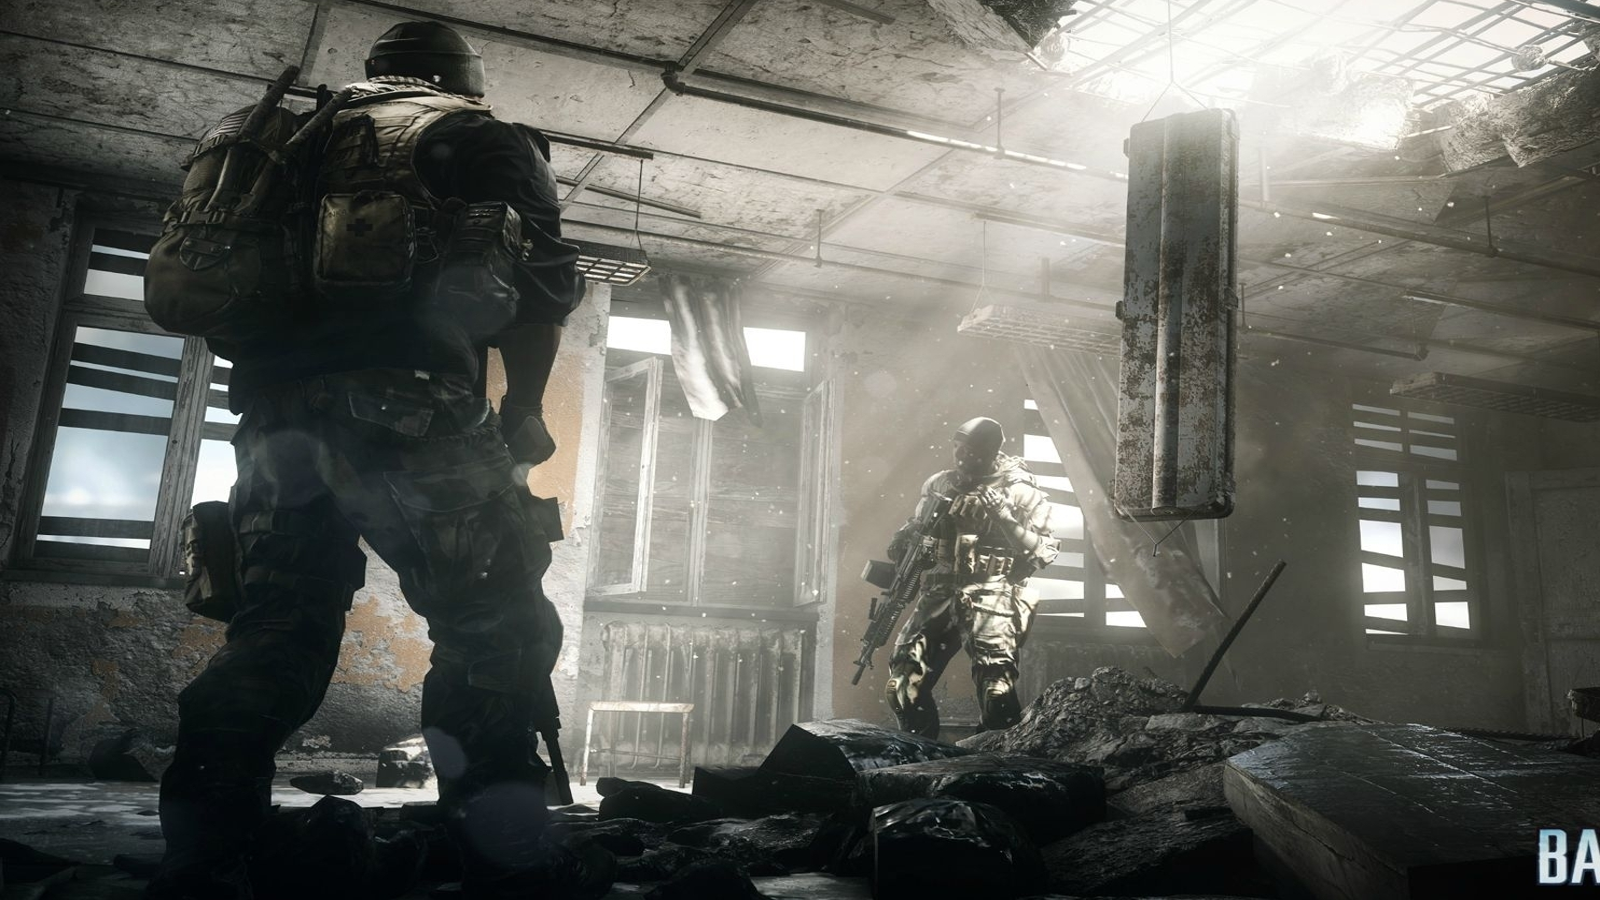 Battlefield 4 launching Oct. 29 on PC, PS3, Xbox 360, now confirmed for  Xbox One - Polygon